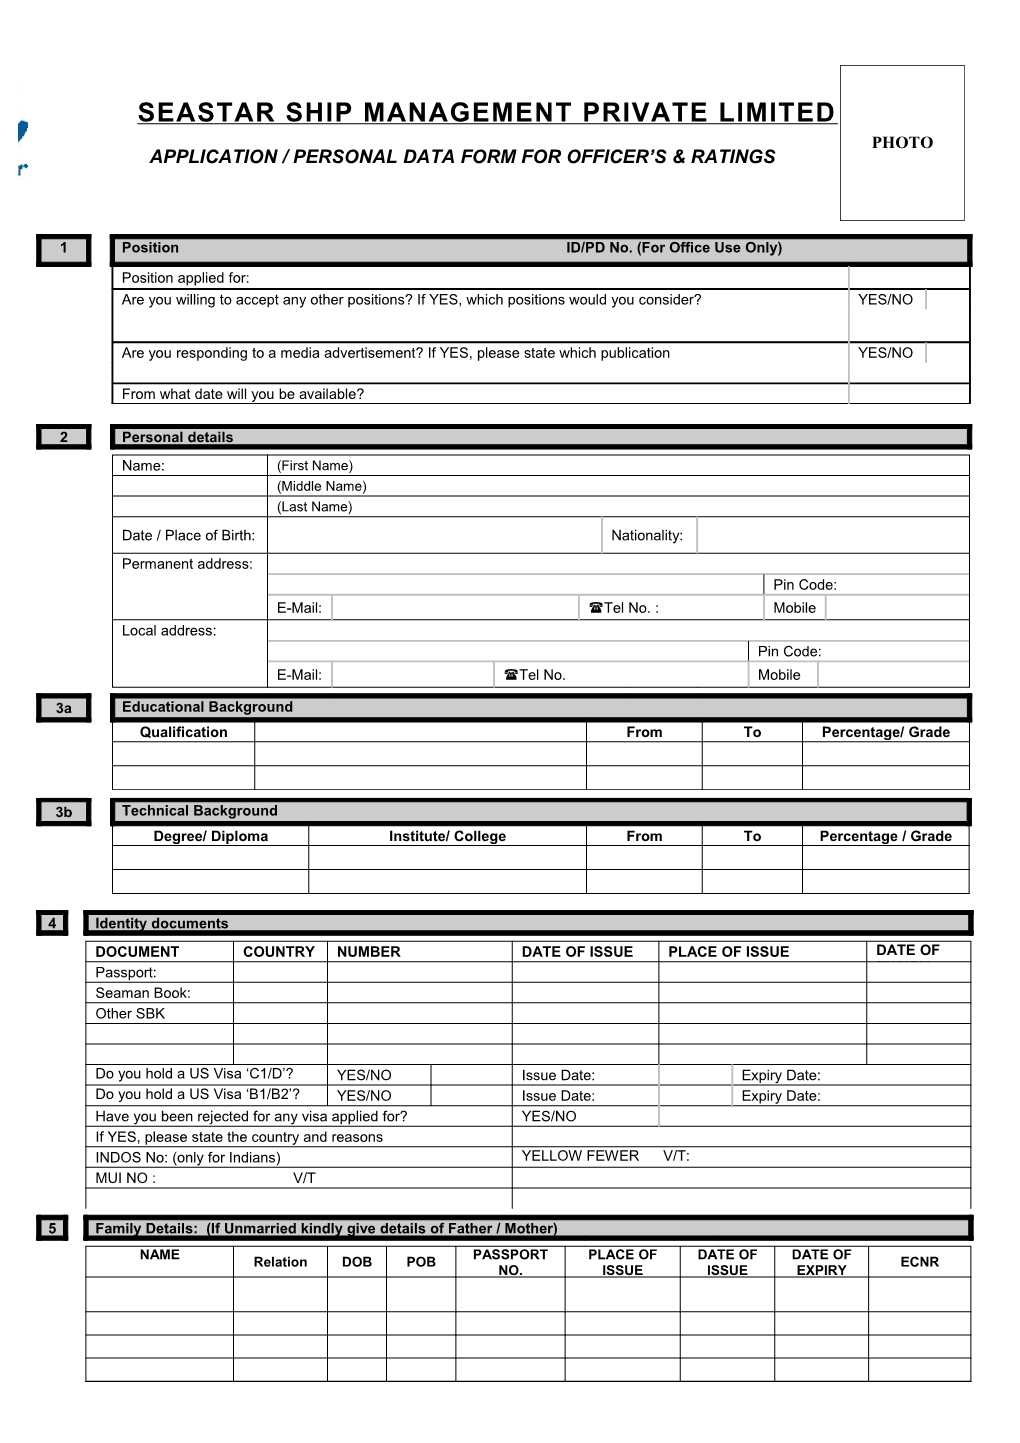 Application / Personal Data Form for Officer S& Ratings